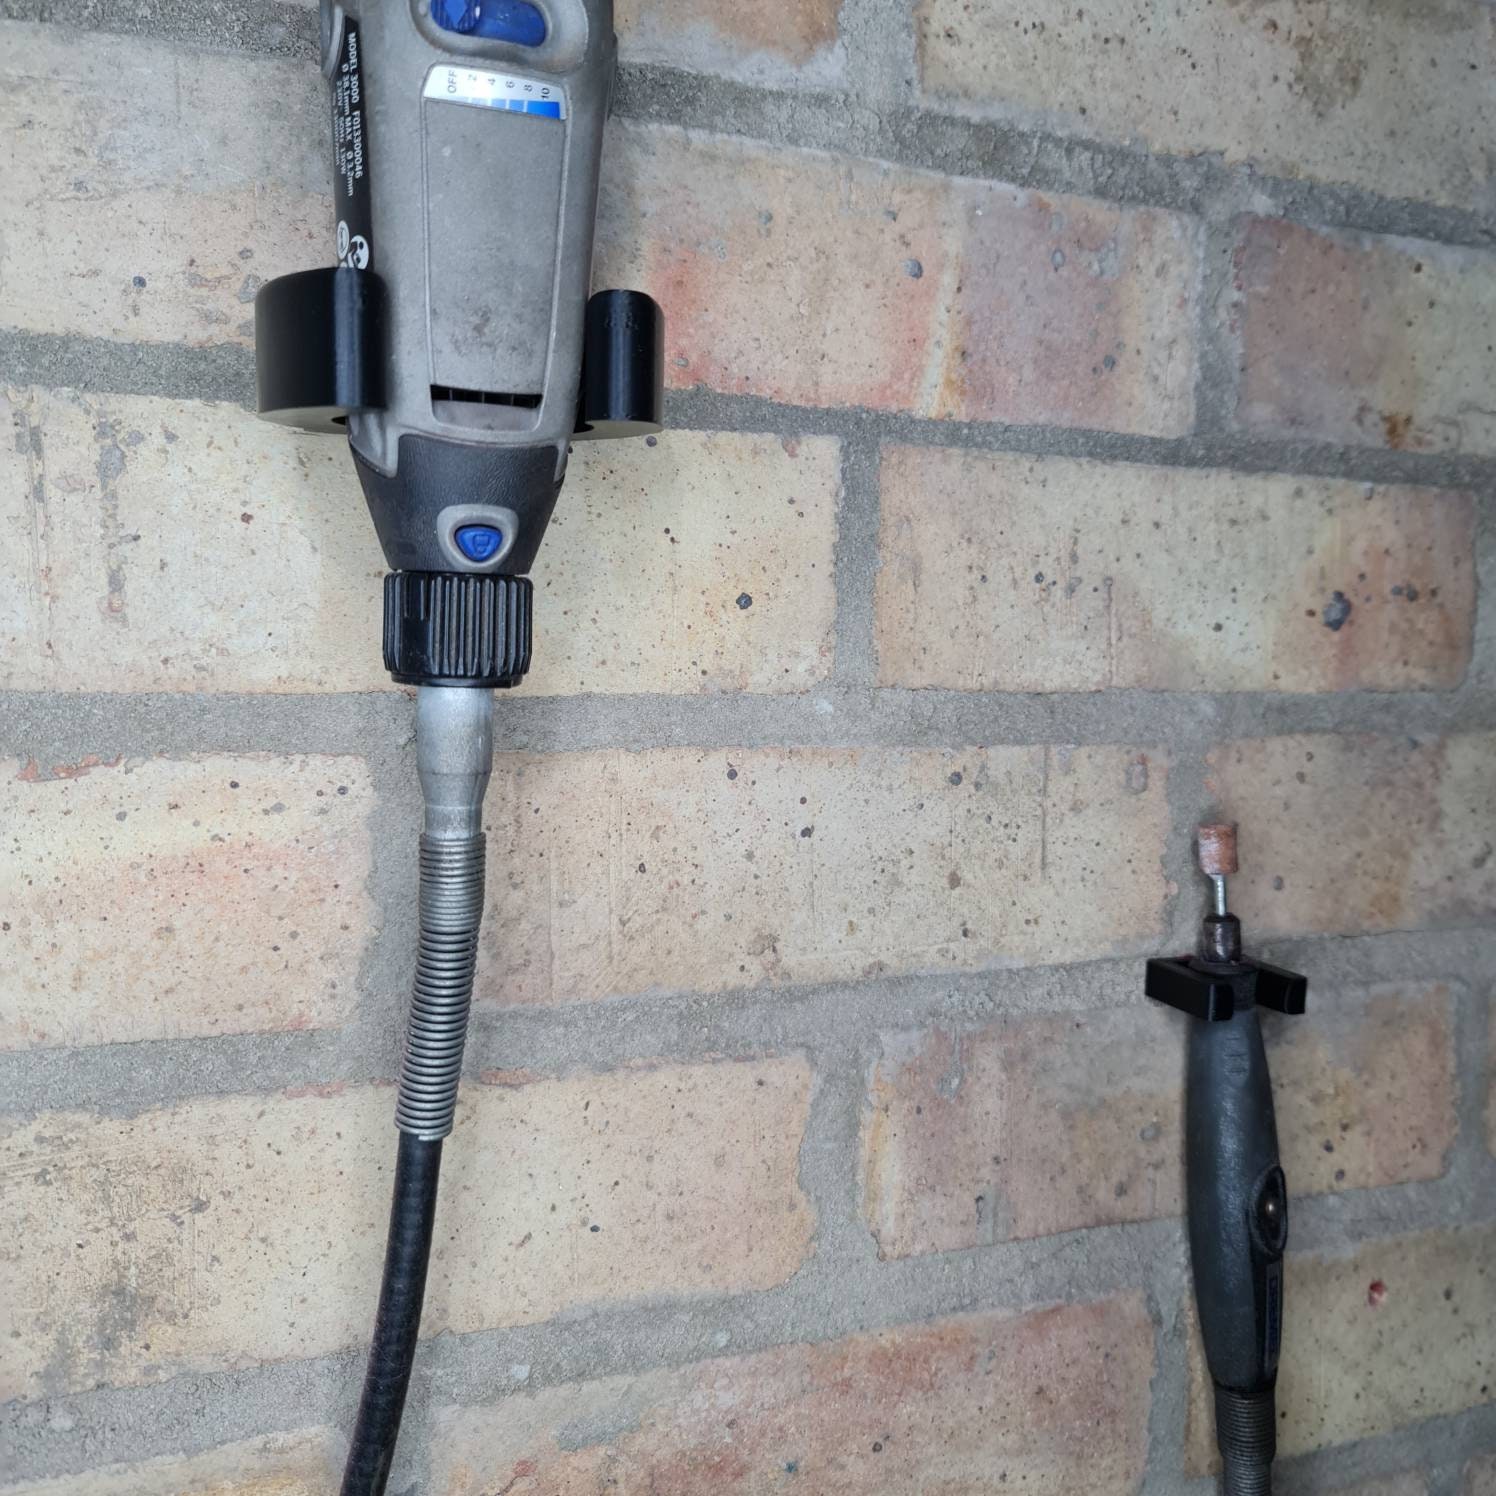 Wall-mounted Hanger / Storage Solution for Dremel Rotary Tool